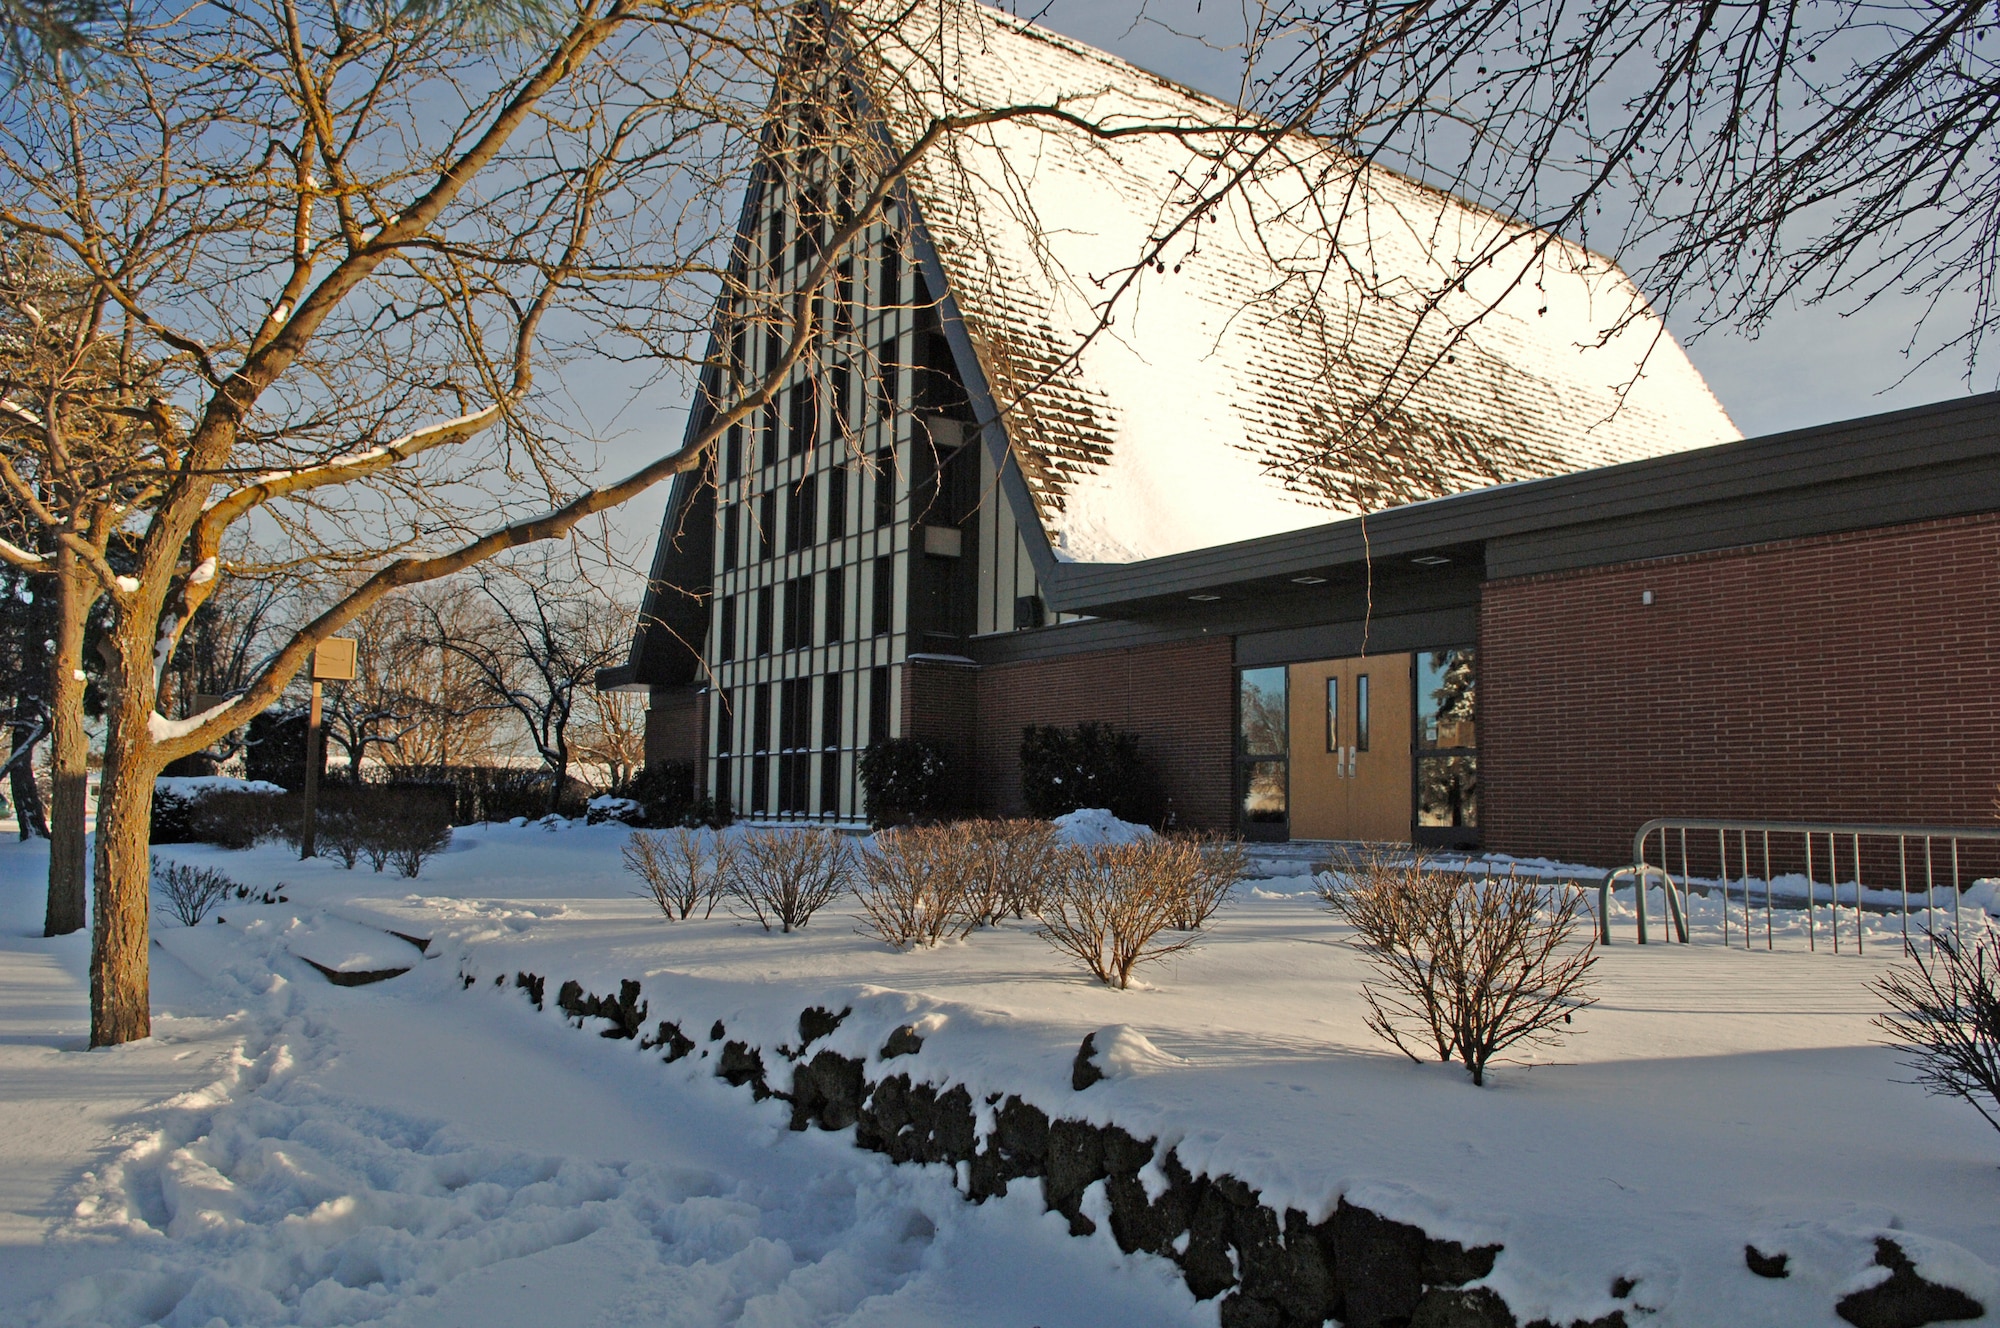 The base chapel sits serenely in the winter snow. Over the past week, Fairchild has received a layer of snow that has blanketed the entire base in white.